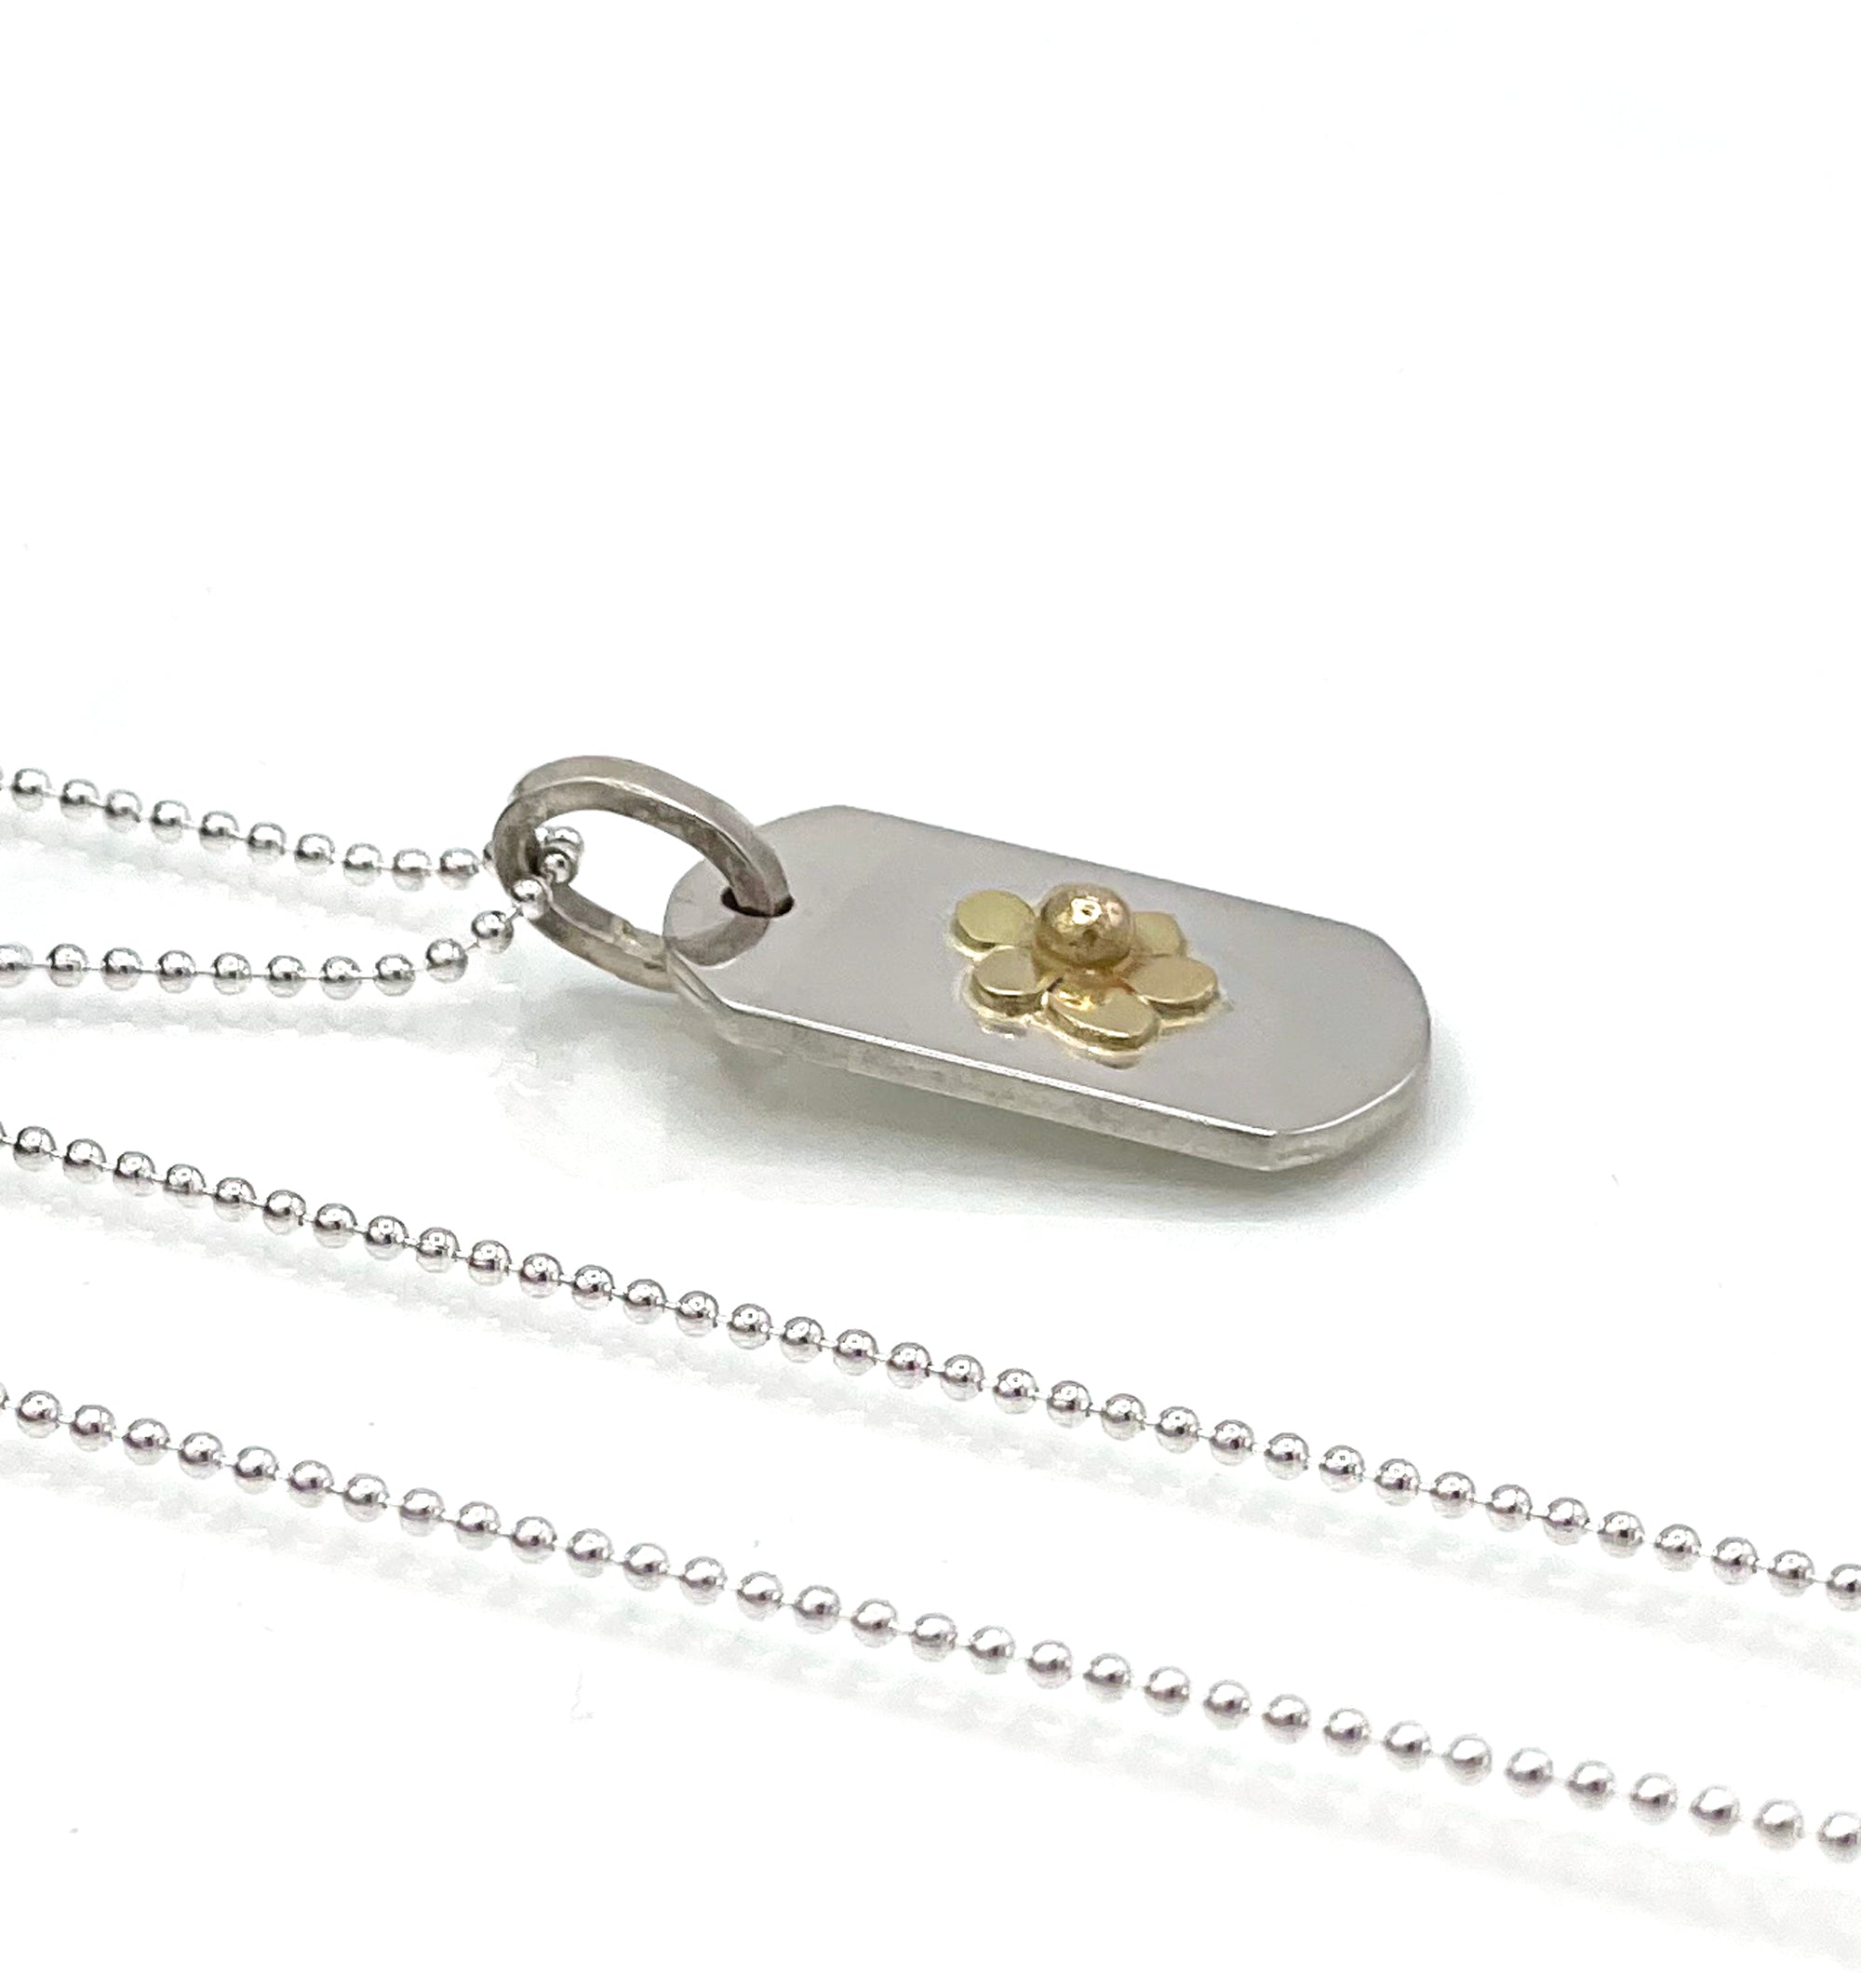 Flower Dog Tag Necklace, Sterling and 14K Solid Yellow Gold, One of a Kind